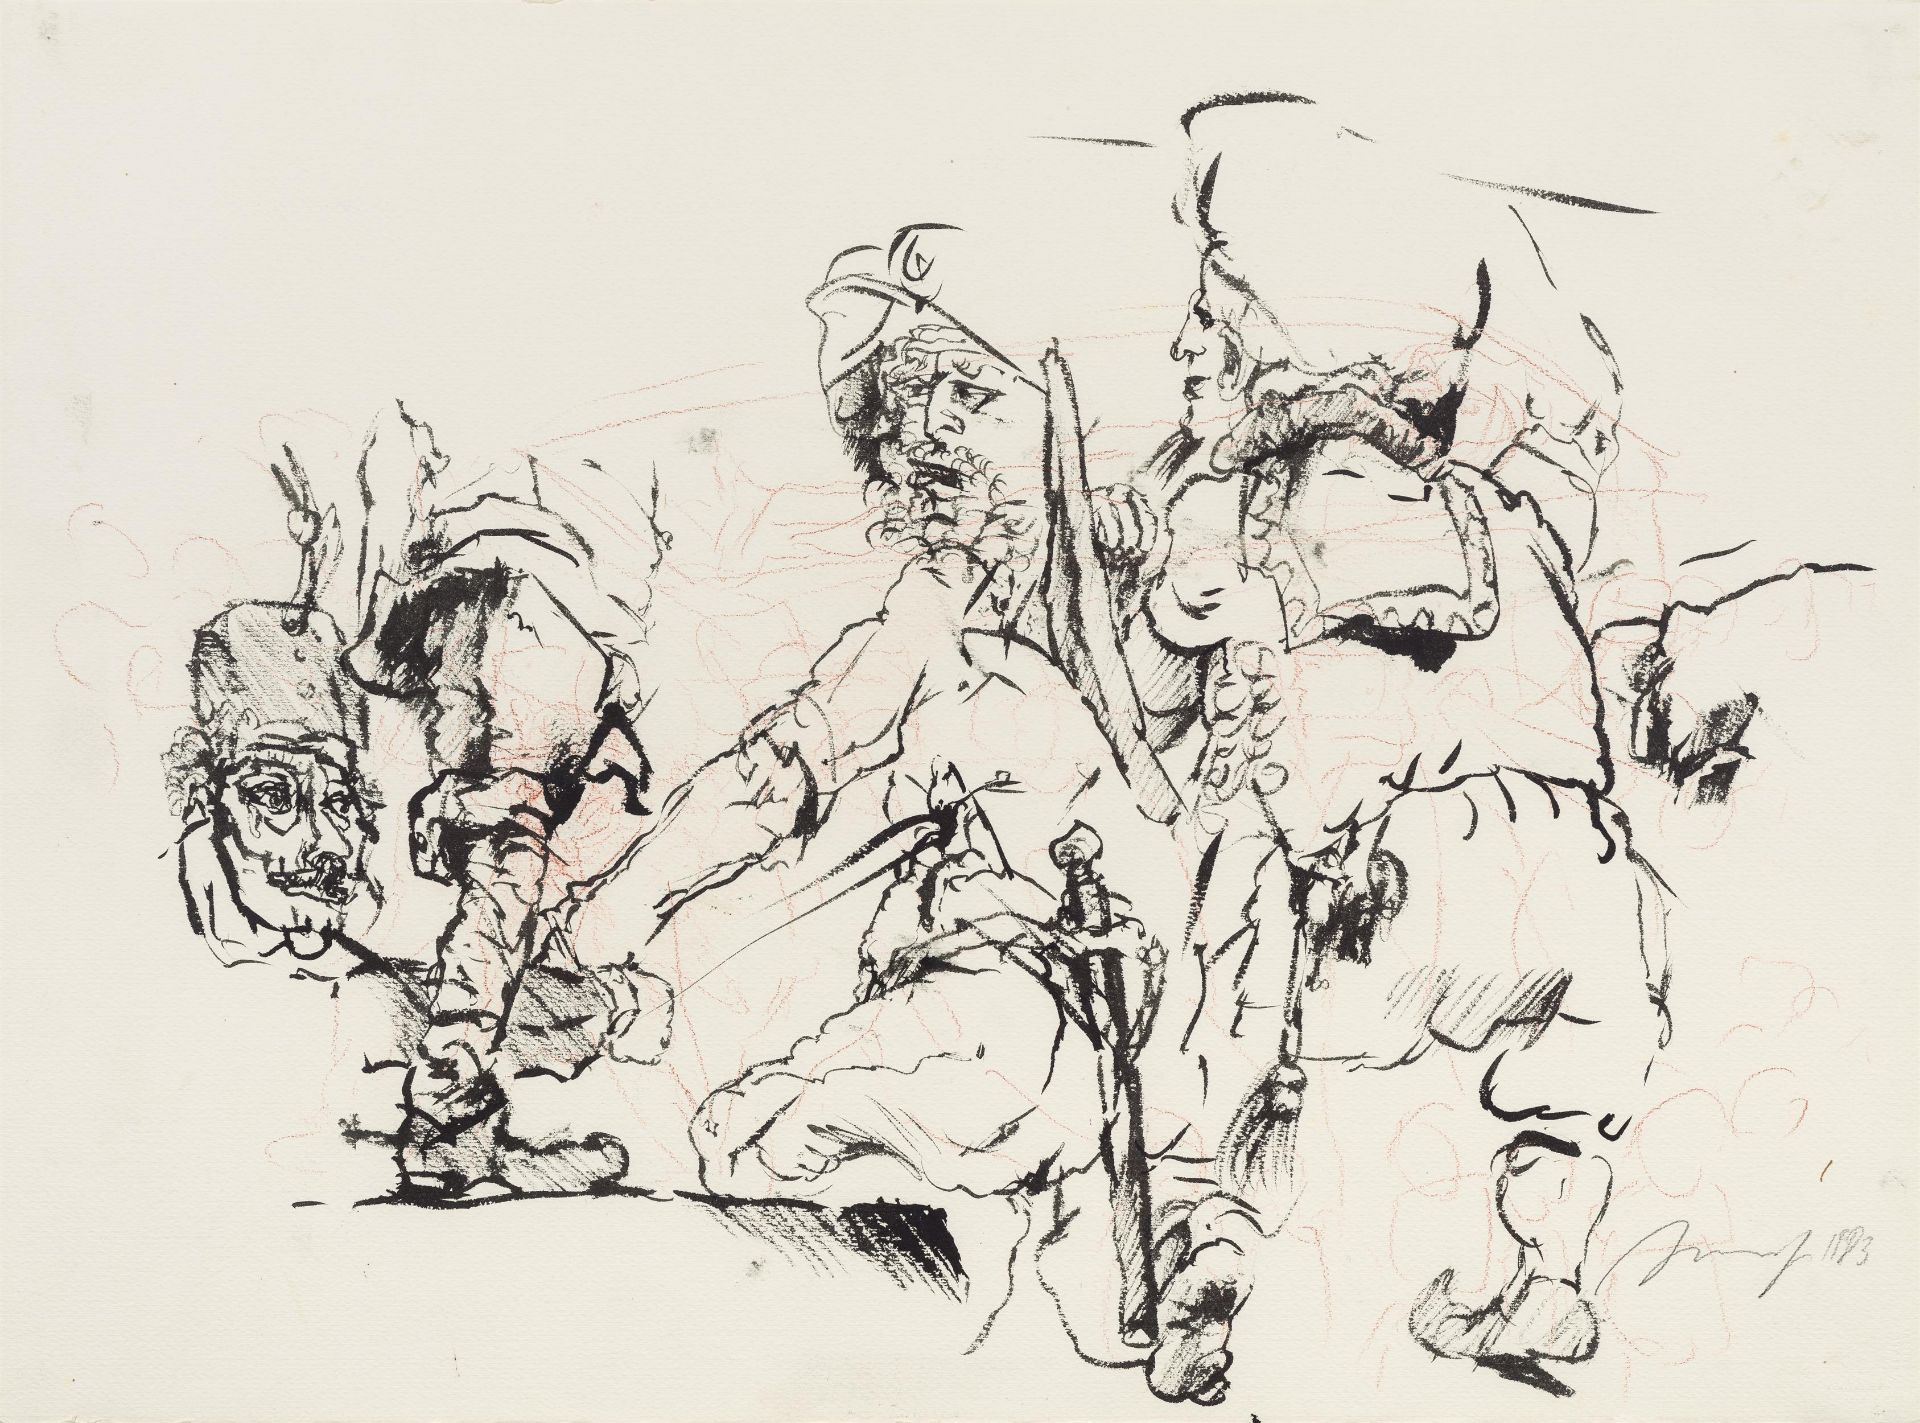 Alfred Hrdlicka: Study for "Bauernkrieg" (from the cycle: Bauernkrieg)